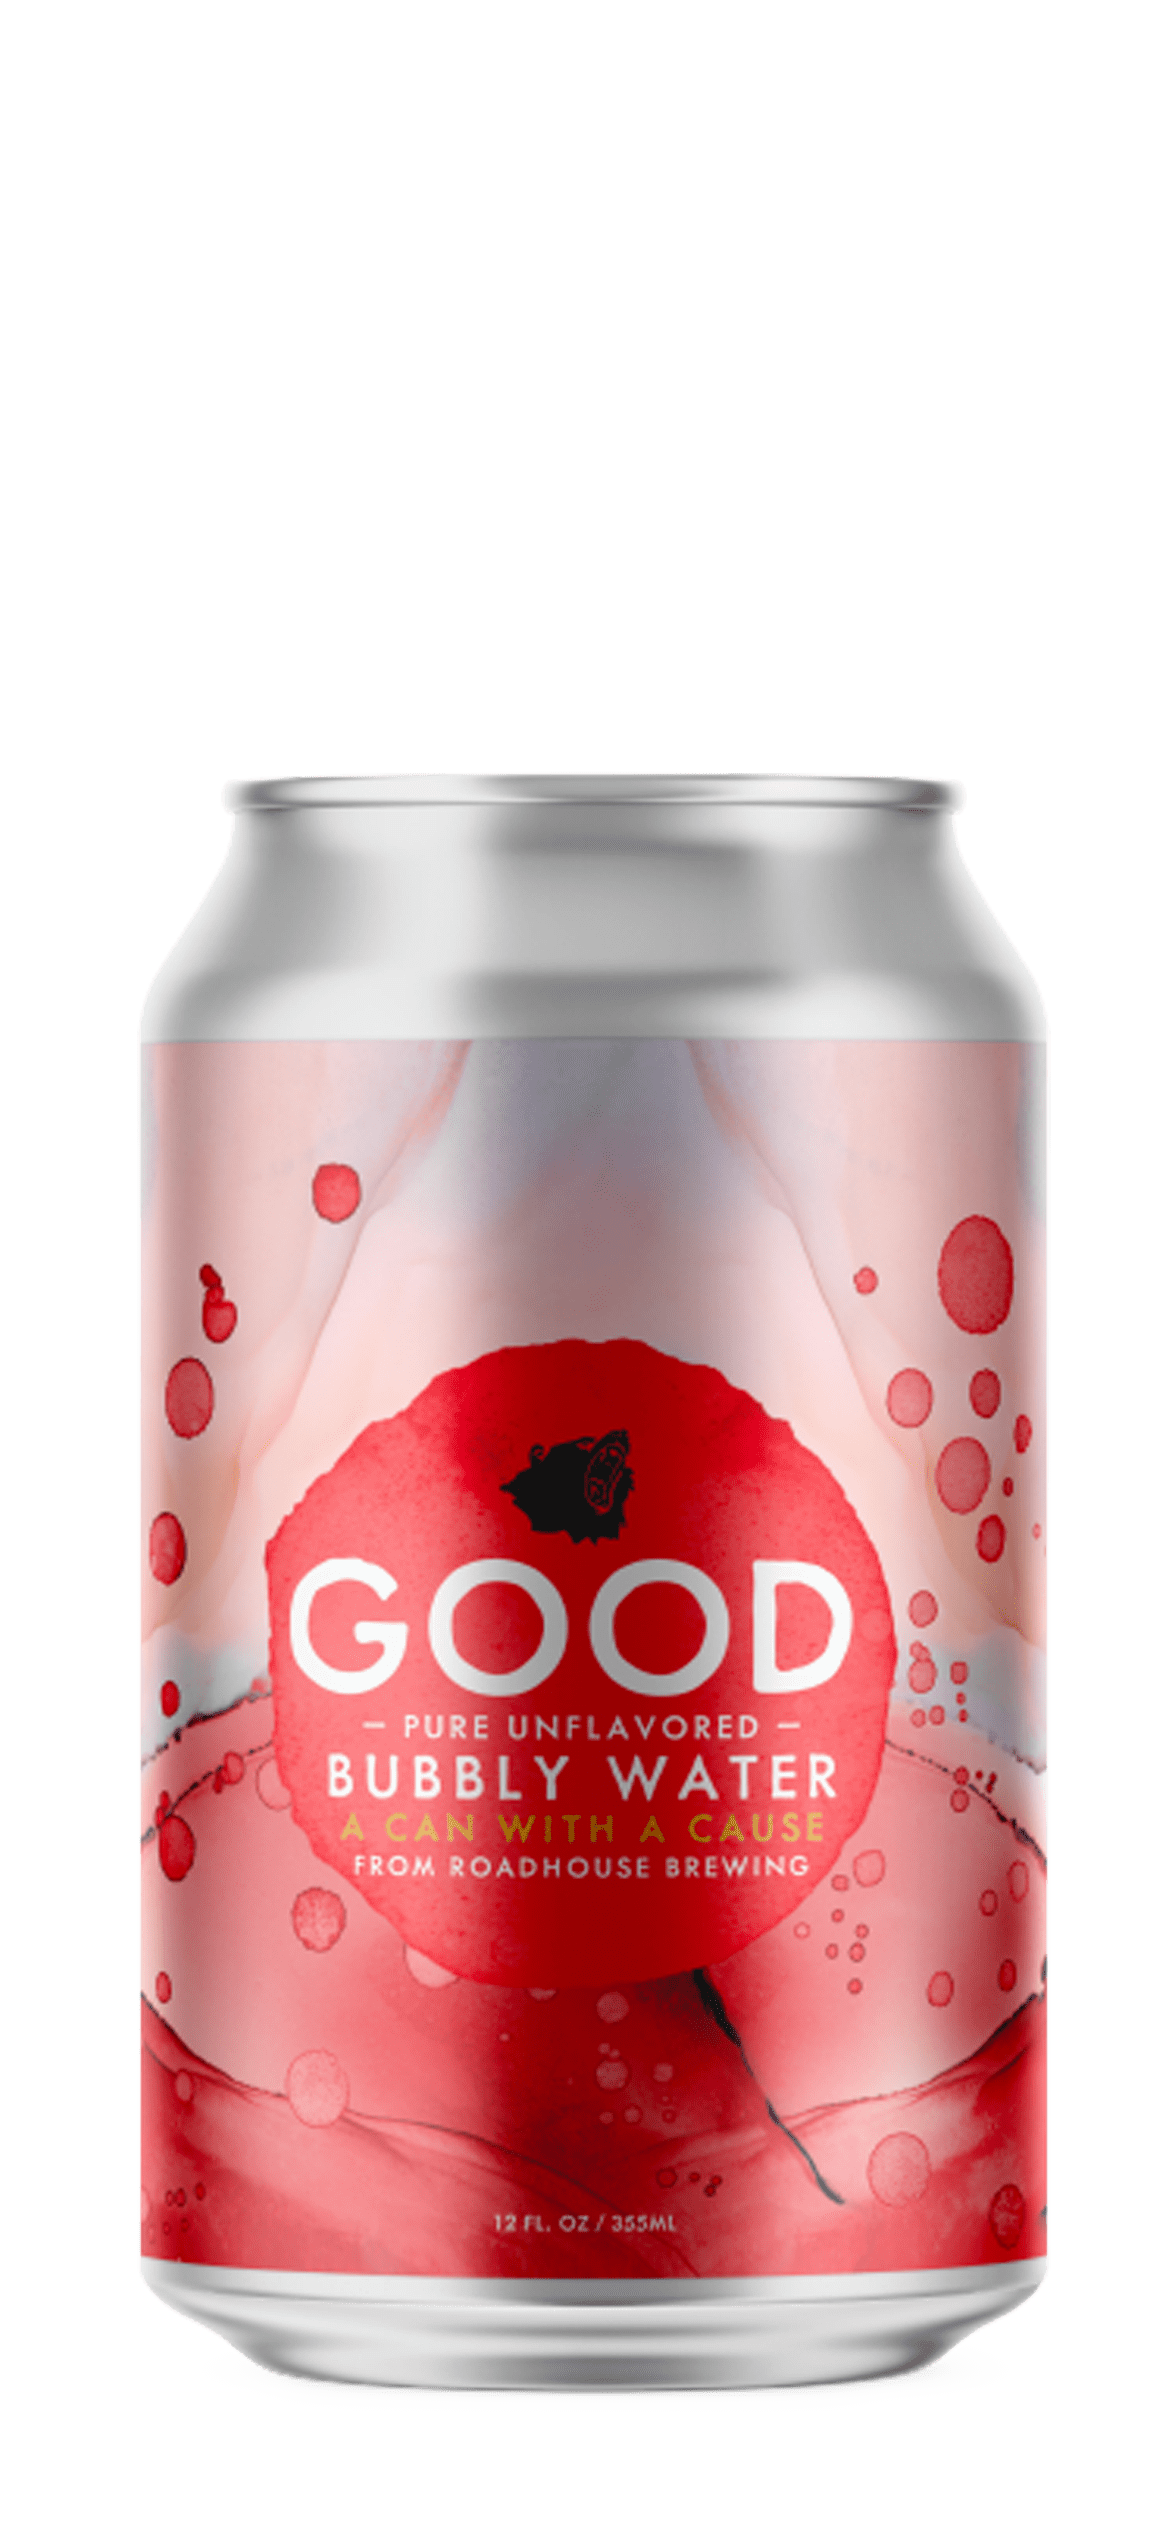 GOOD Bubbly Water